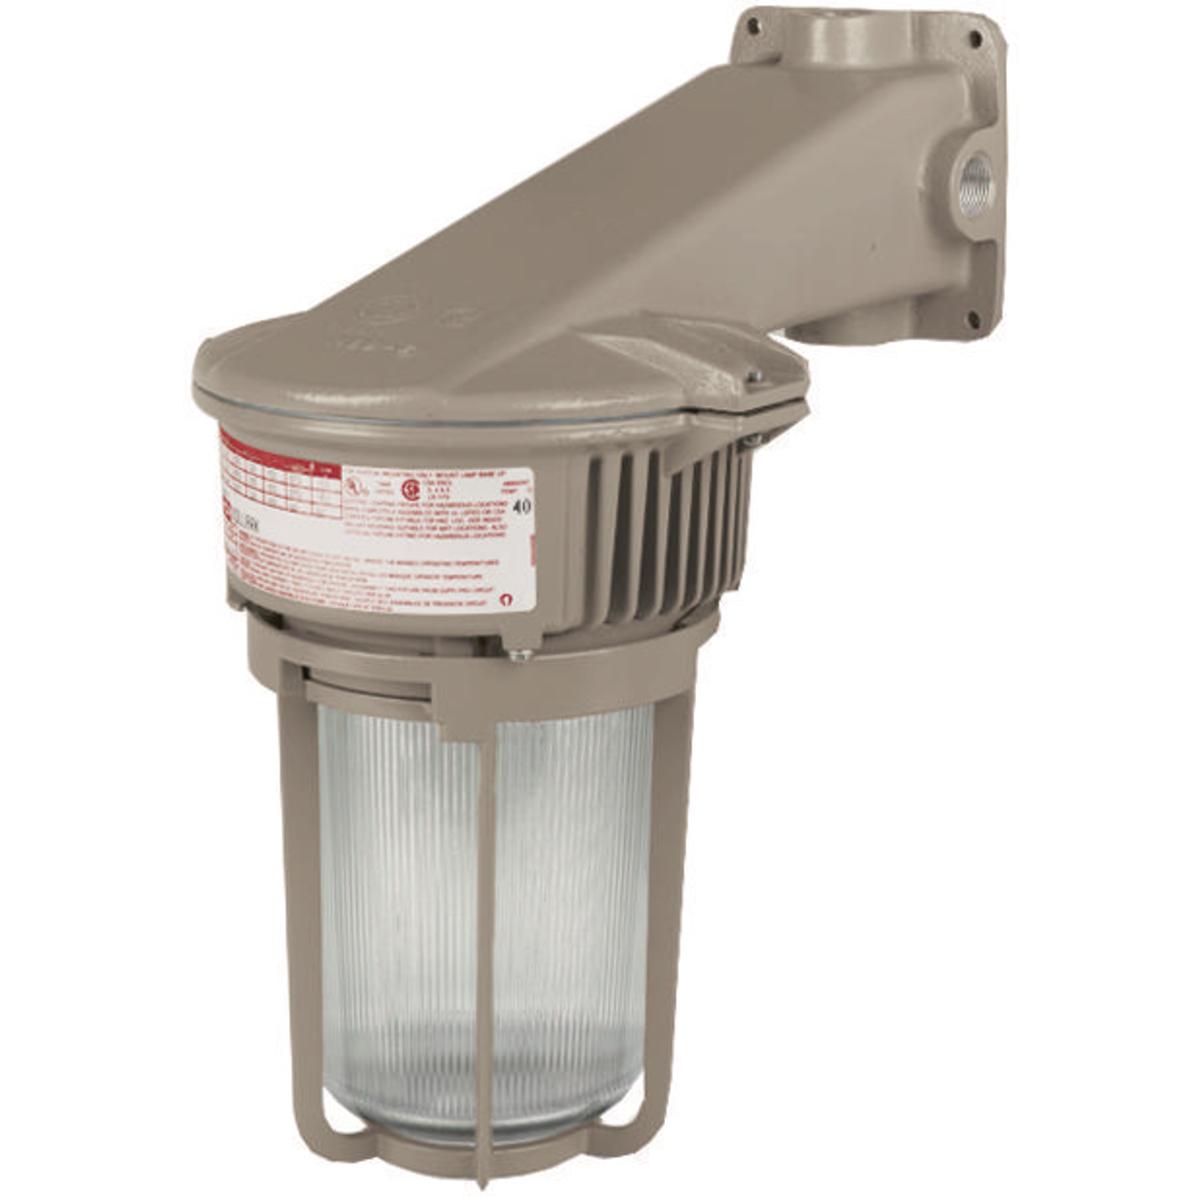 Hubbell MBL501-GGB2 NR 50W HPS Fluorescent 120V  3/4" Wall Mount with Guard and Globe- Ex nR  ; Ballast tank and splice box – corrosion resistant copper-free aluminum alloy ; Baked powder epoxy/polyester finish, electrostatically applied for complete, uniform corrosion protecti